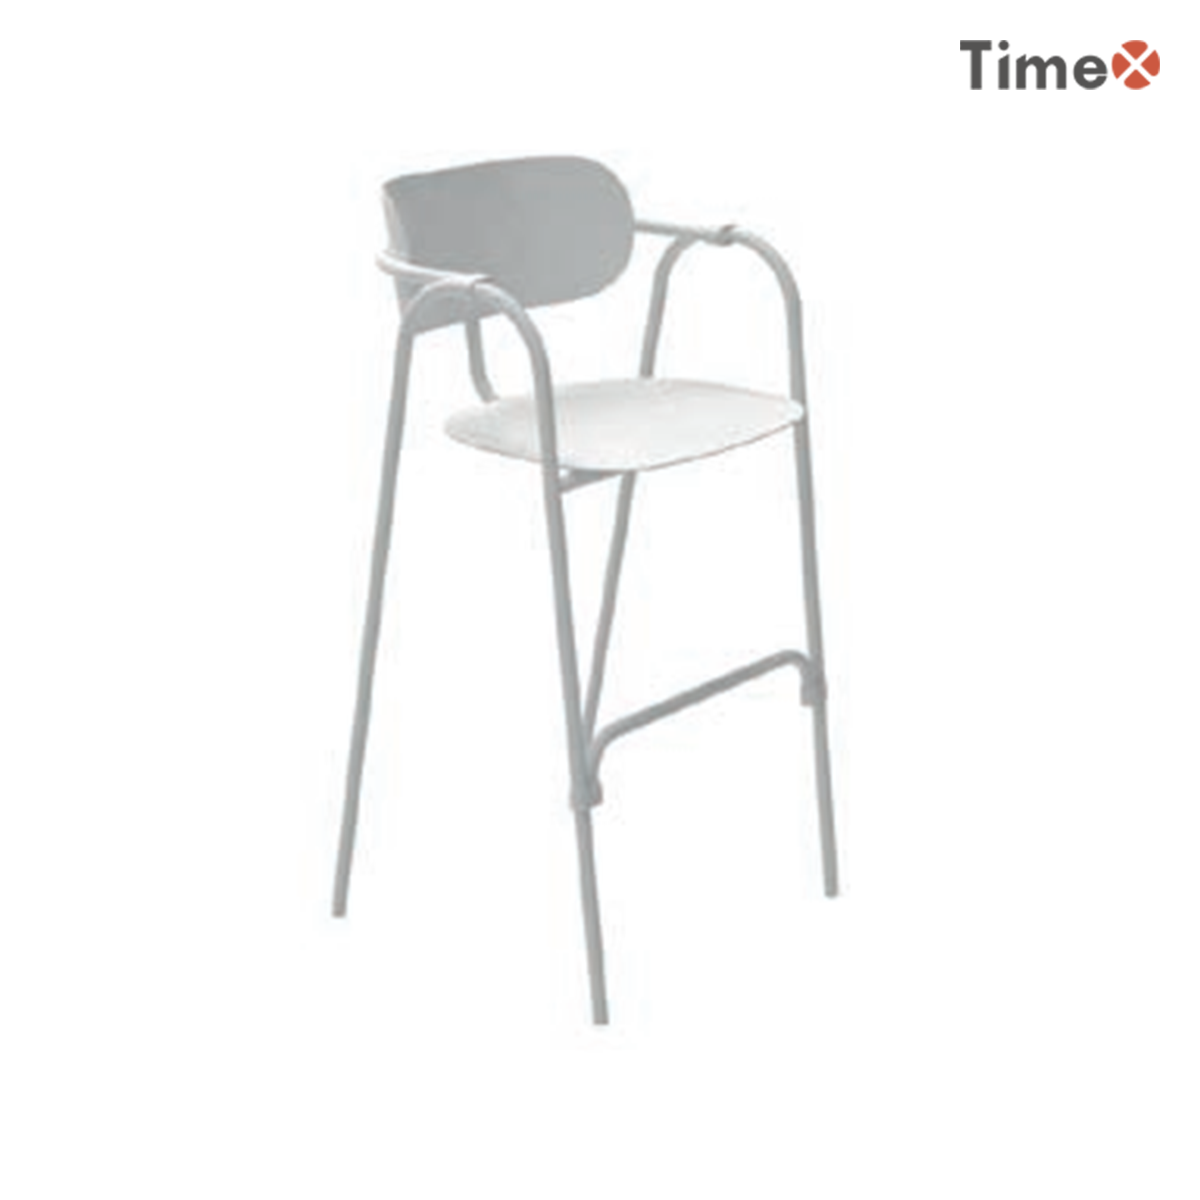 The white design metal chair wholesale.